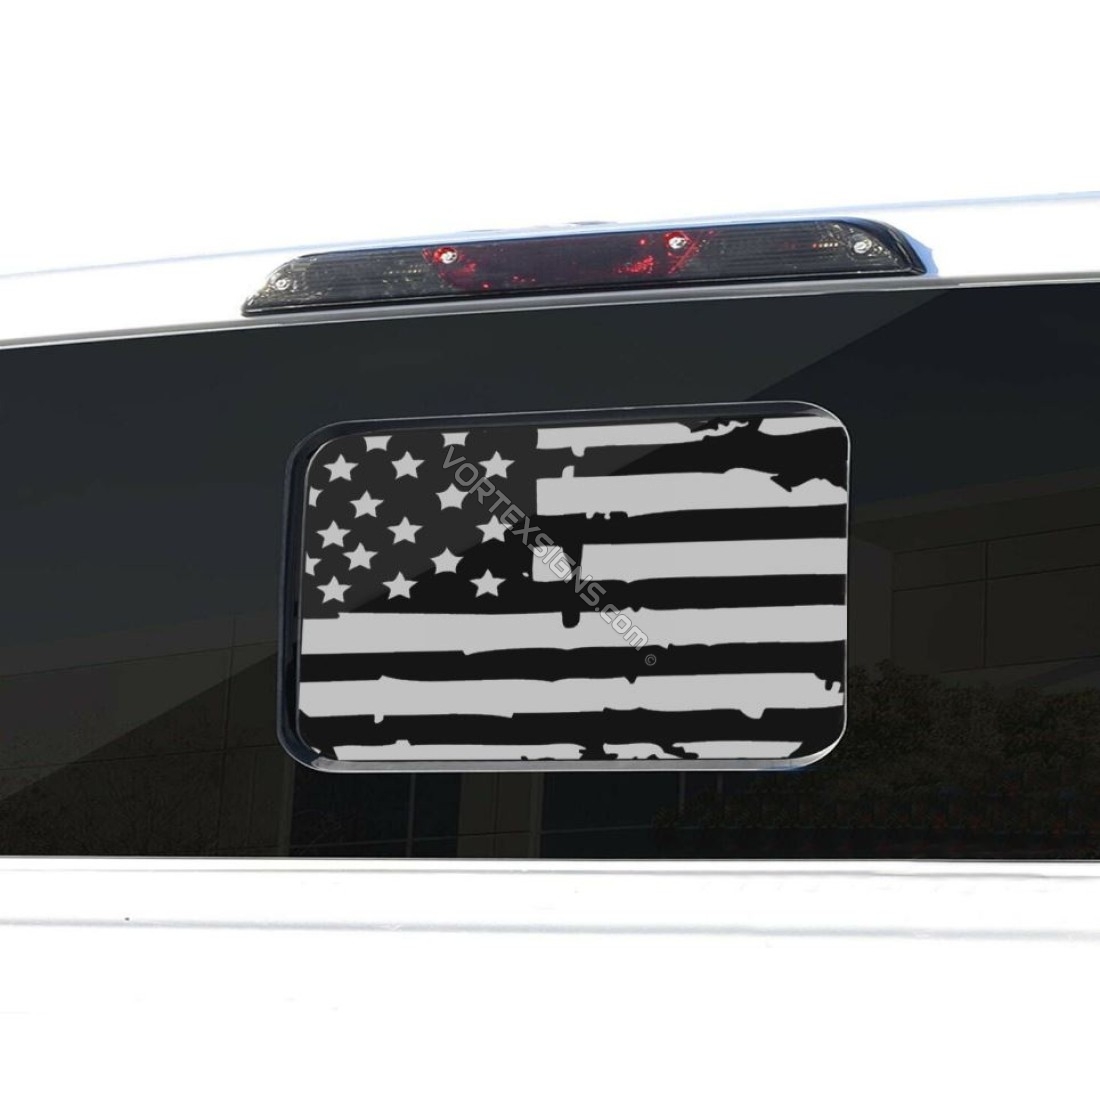 Ford Maverick small rear window flag decal graphics